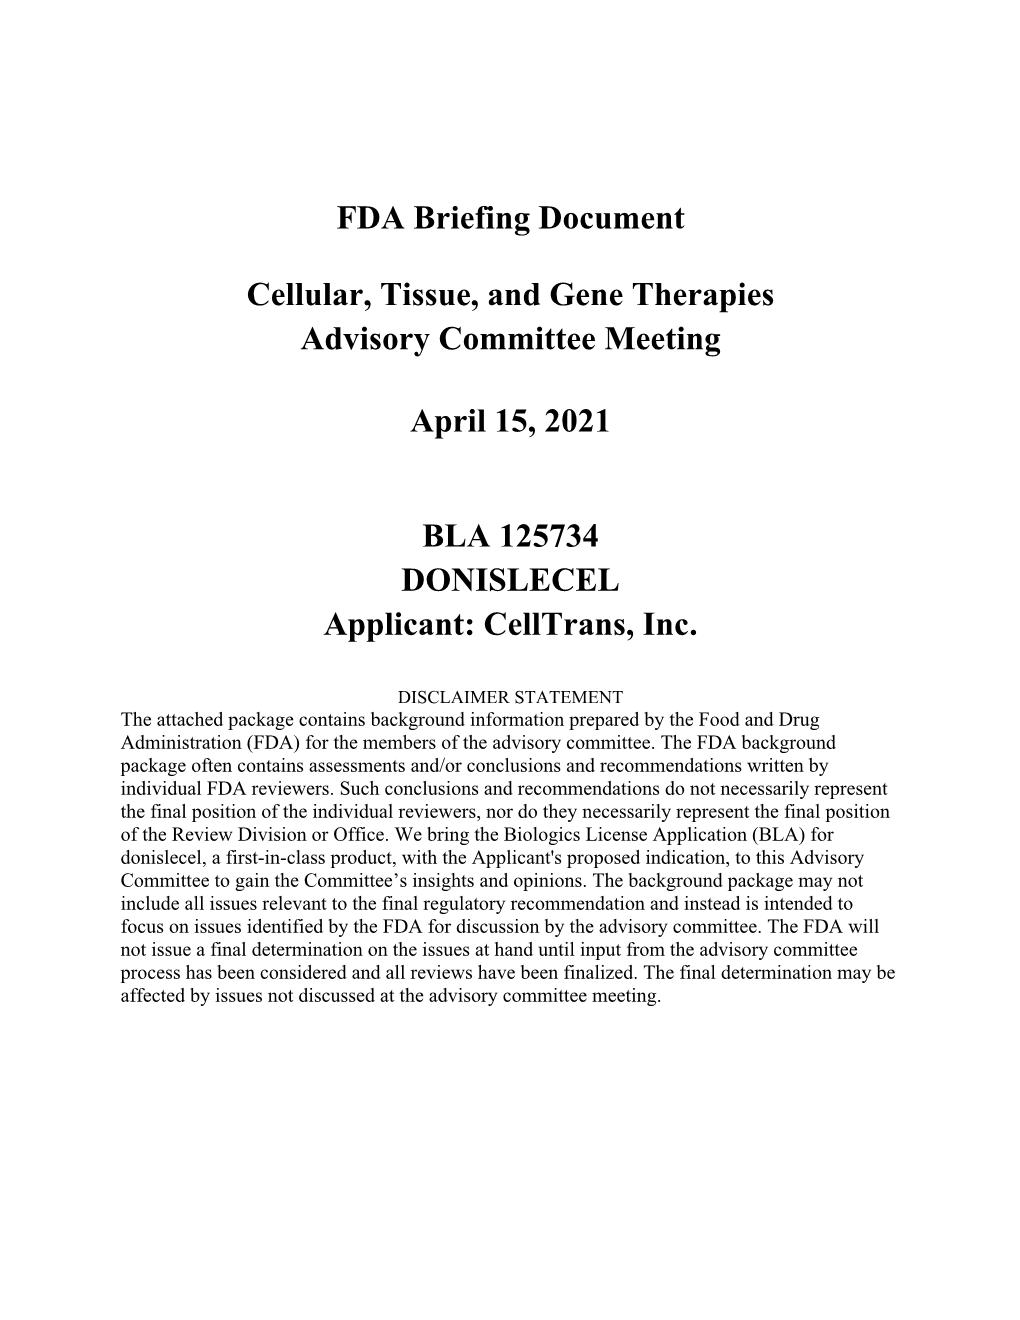 Cellular, Tissue, and Gene Therapies Advisory Committee April 15, 2021